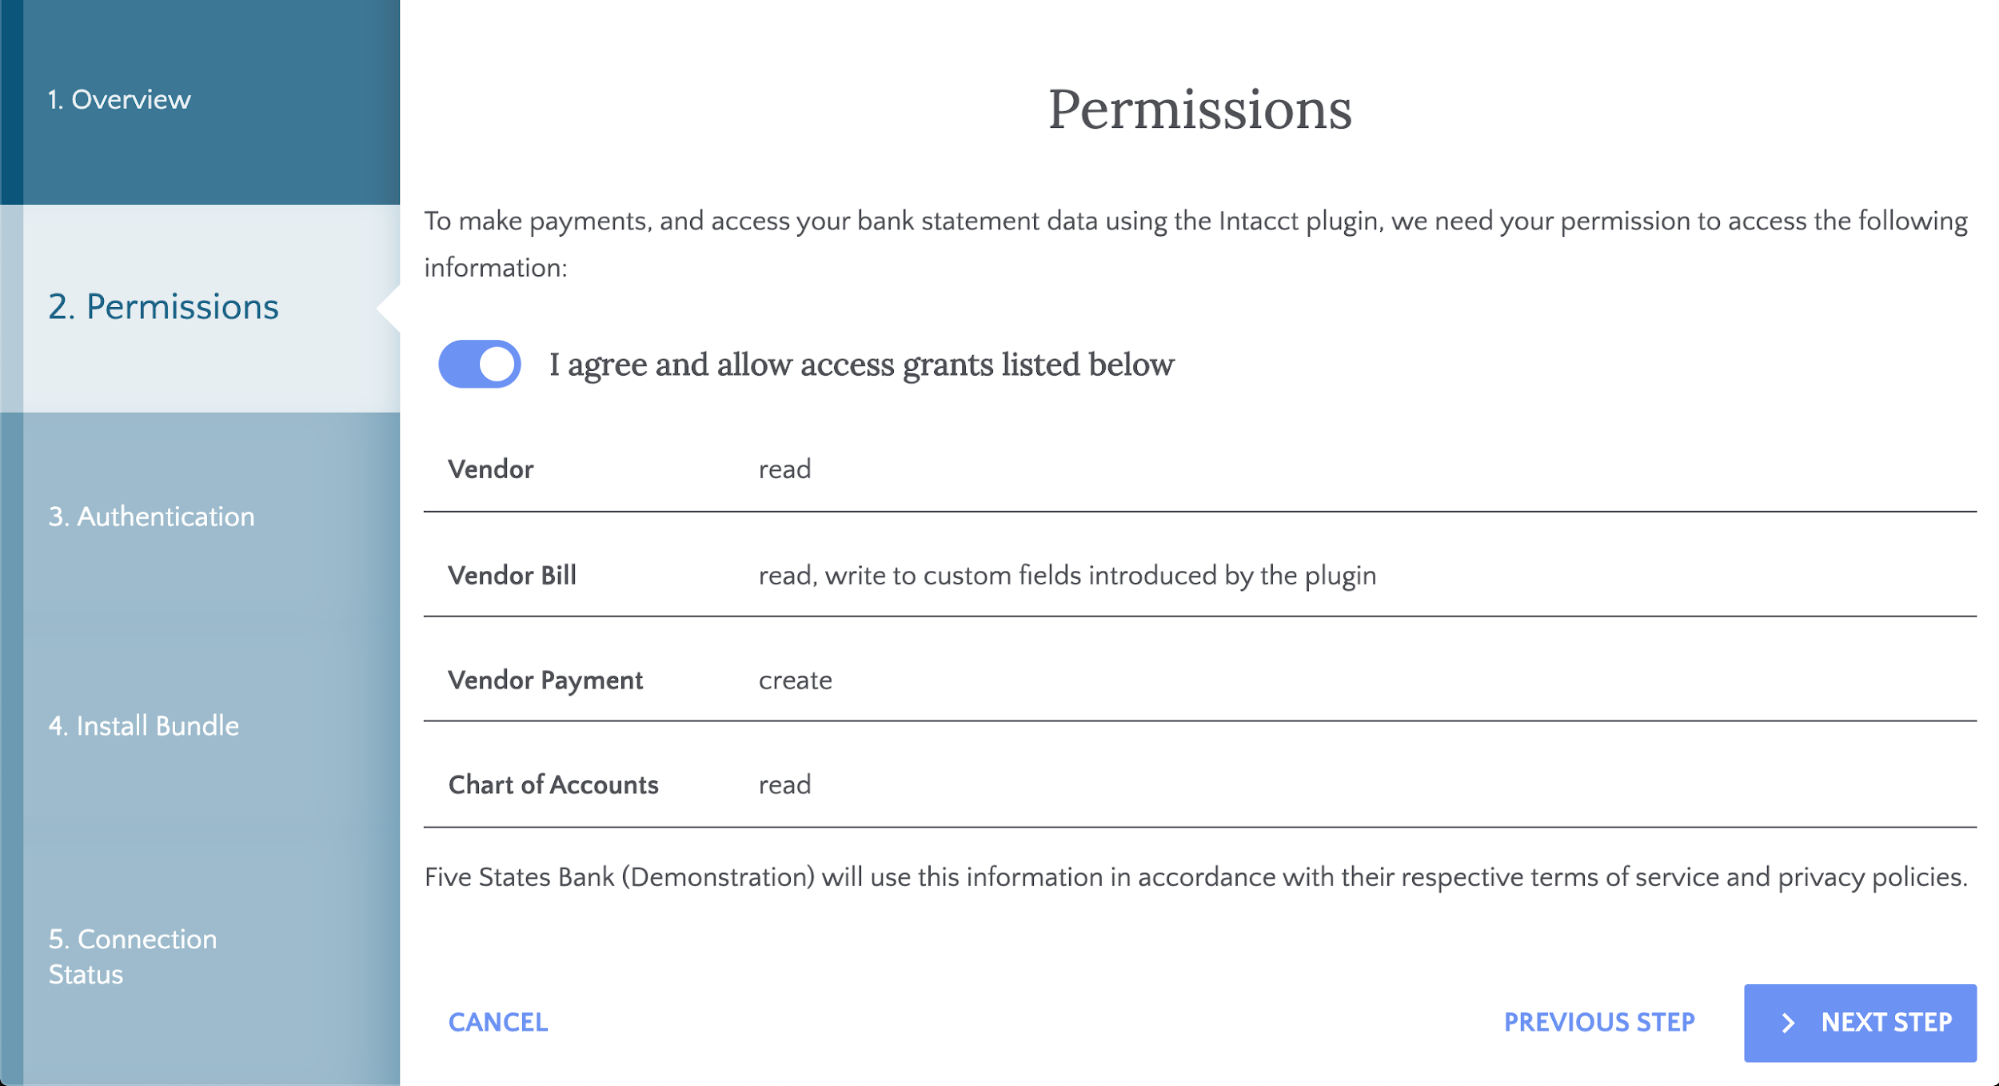 FISPAN Product - Permissions Page